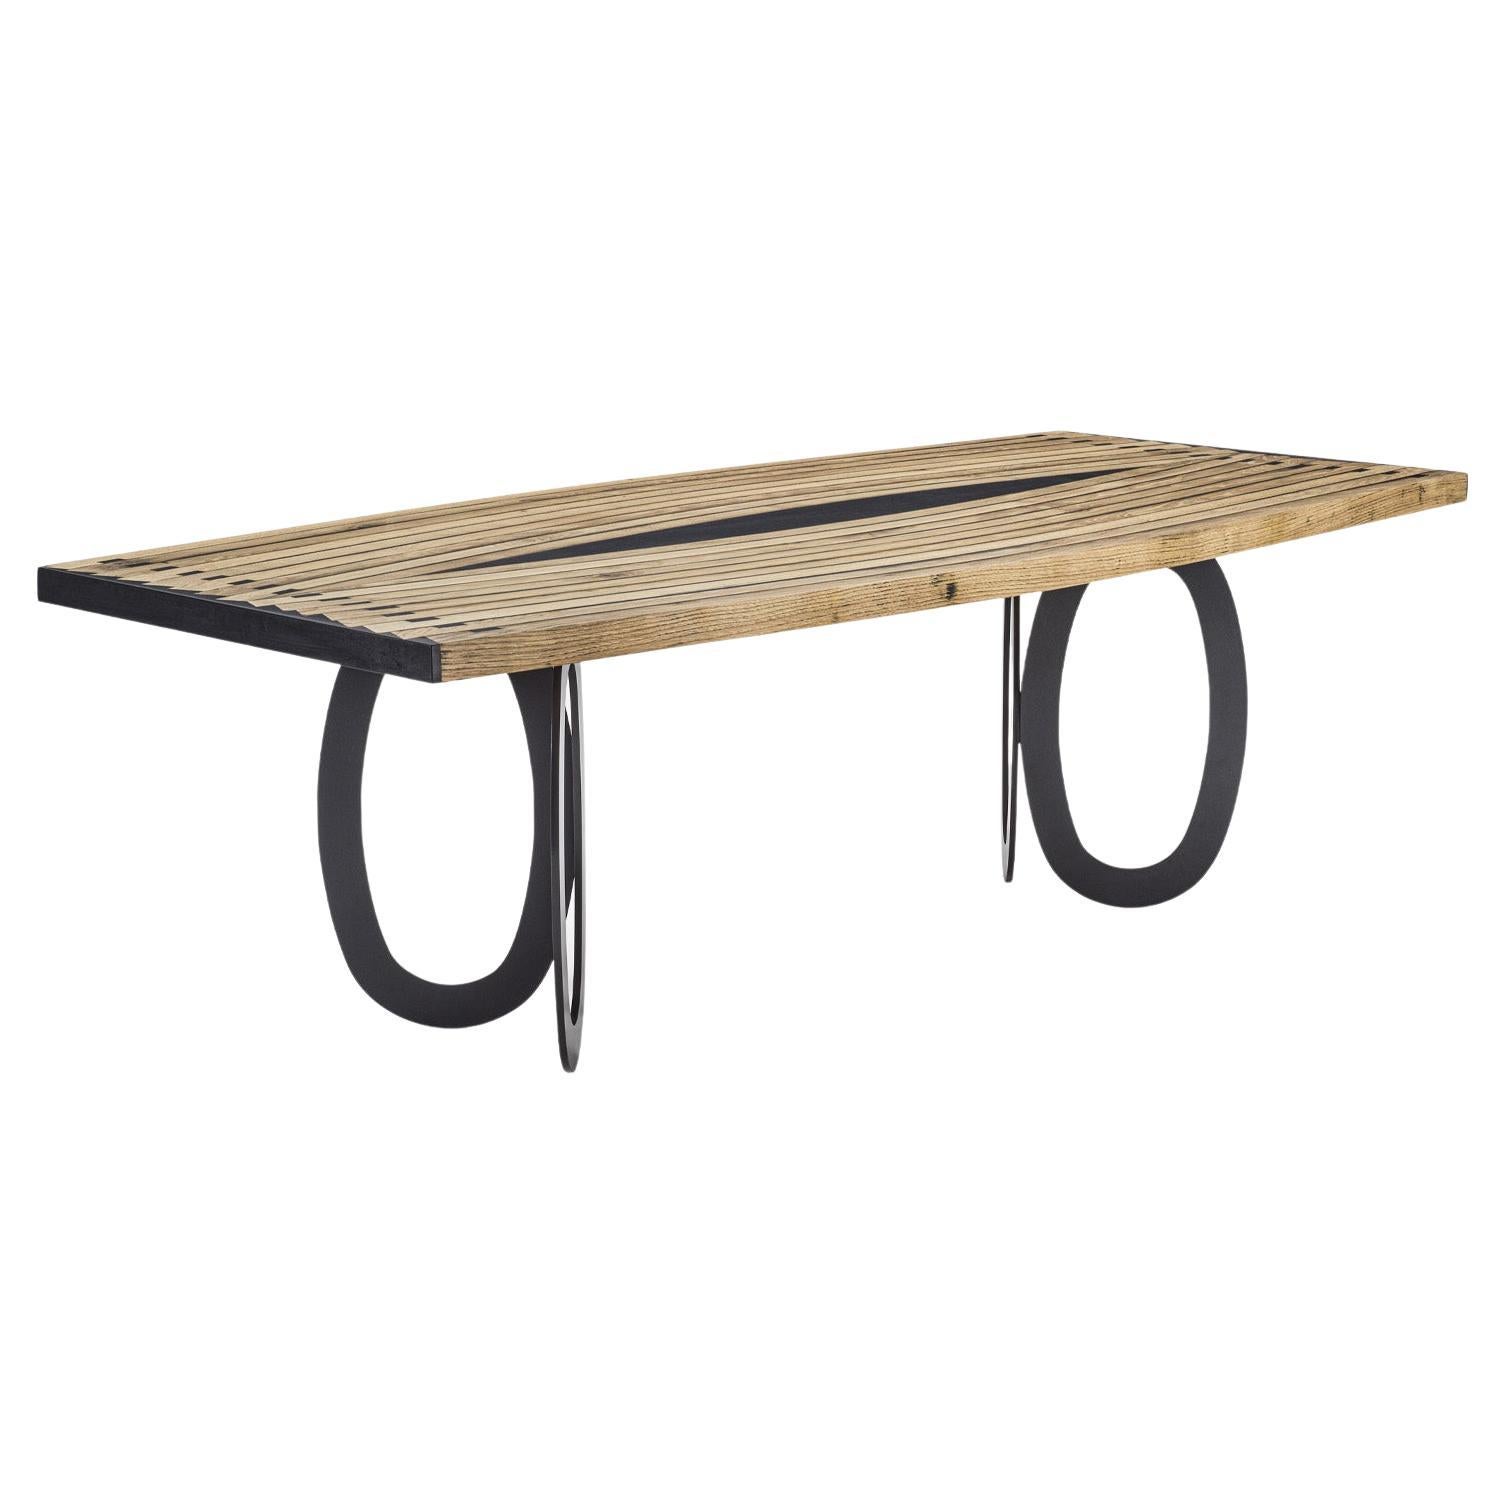 Hypnotic Wood & Iron Dining Table, Designed by Studio Excalibur, Made in Italy For Sale